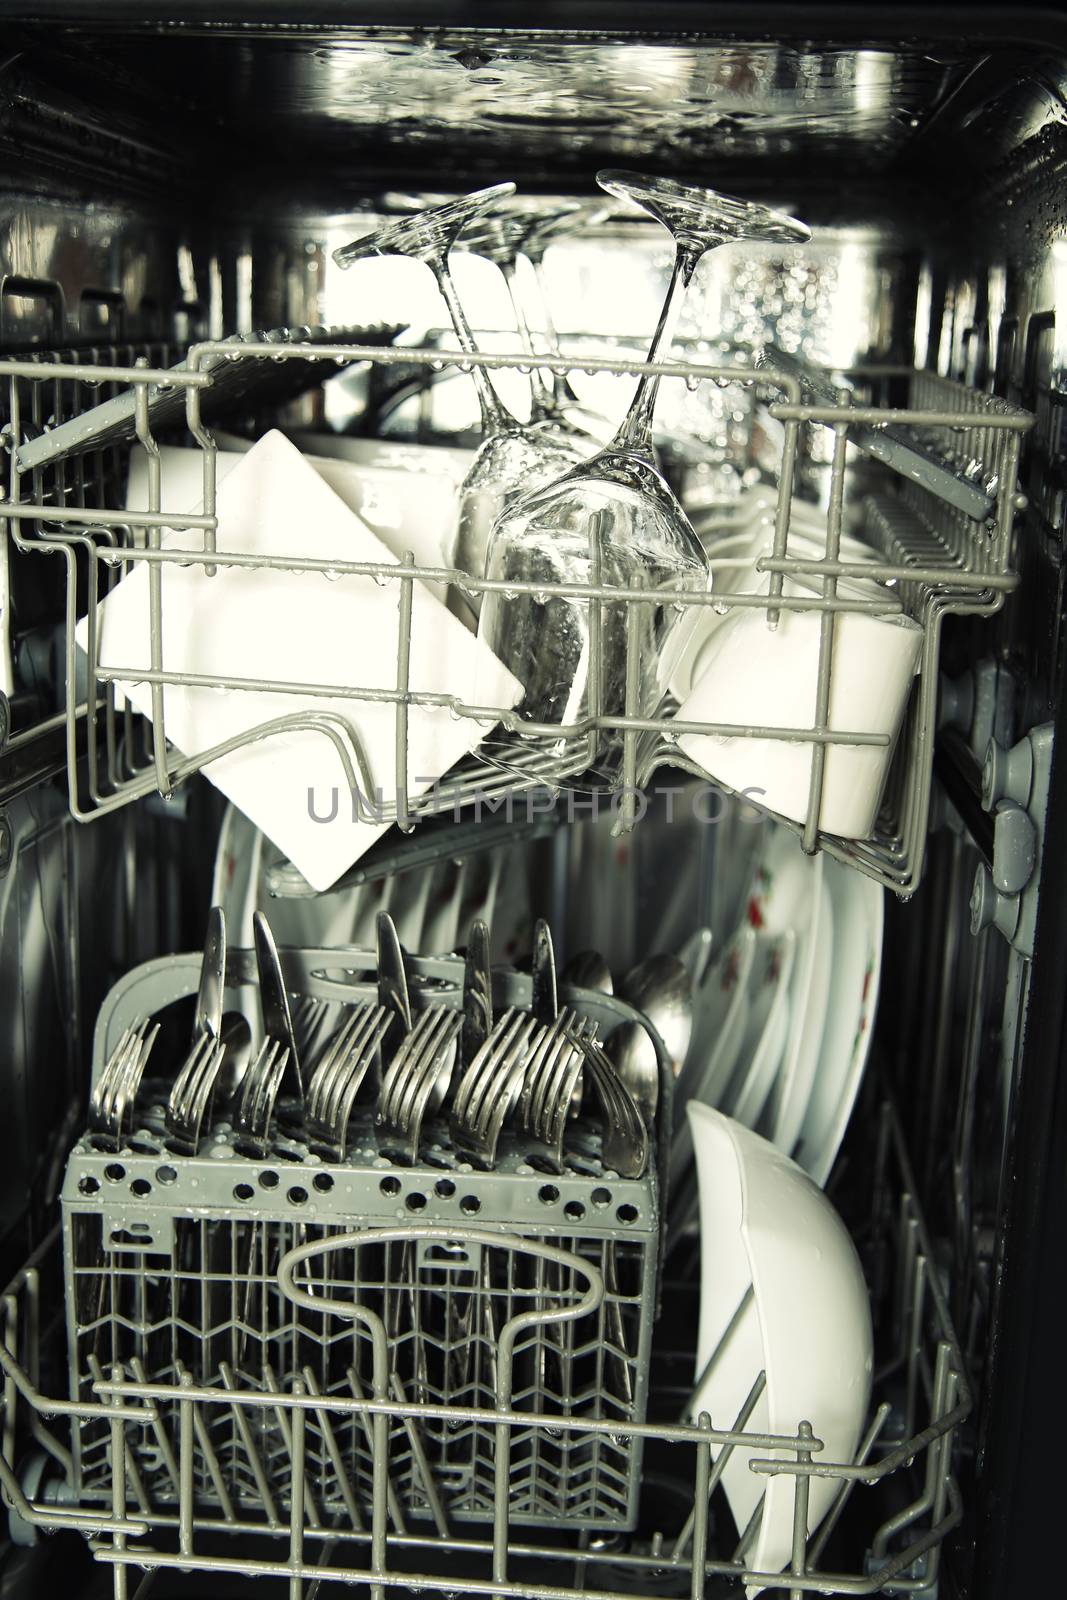 details of open dishwasher, utensils with drops in during washin by vladacanon